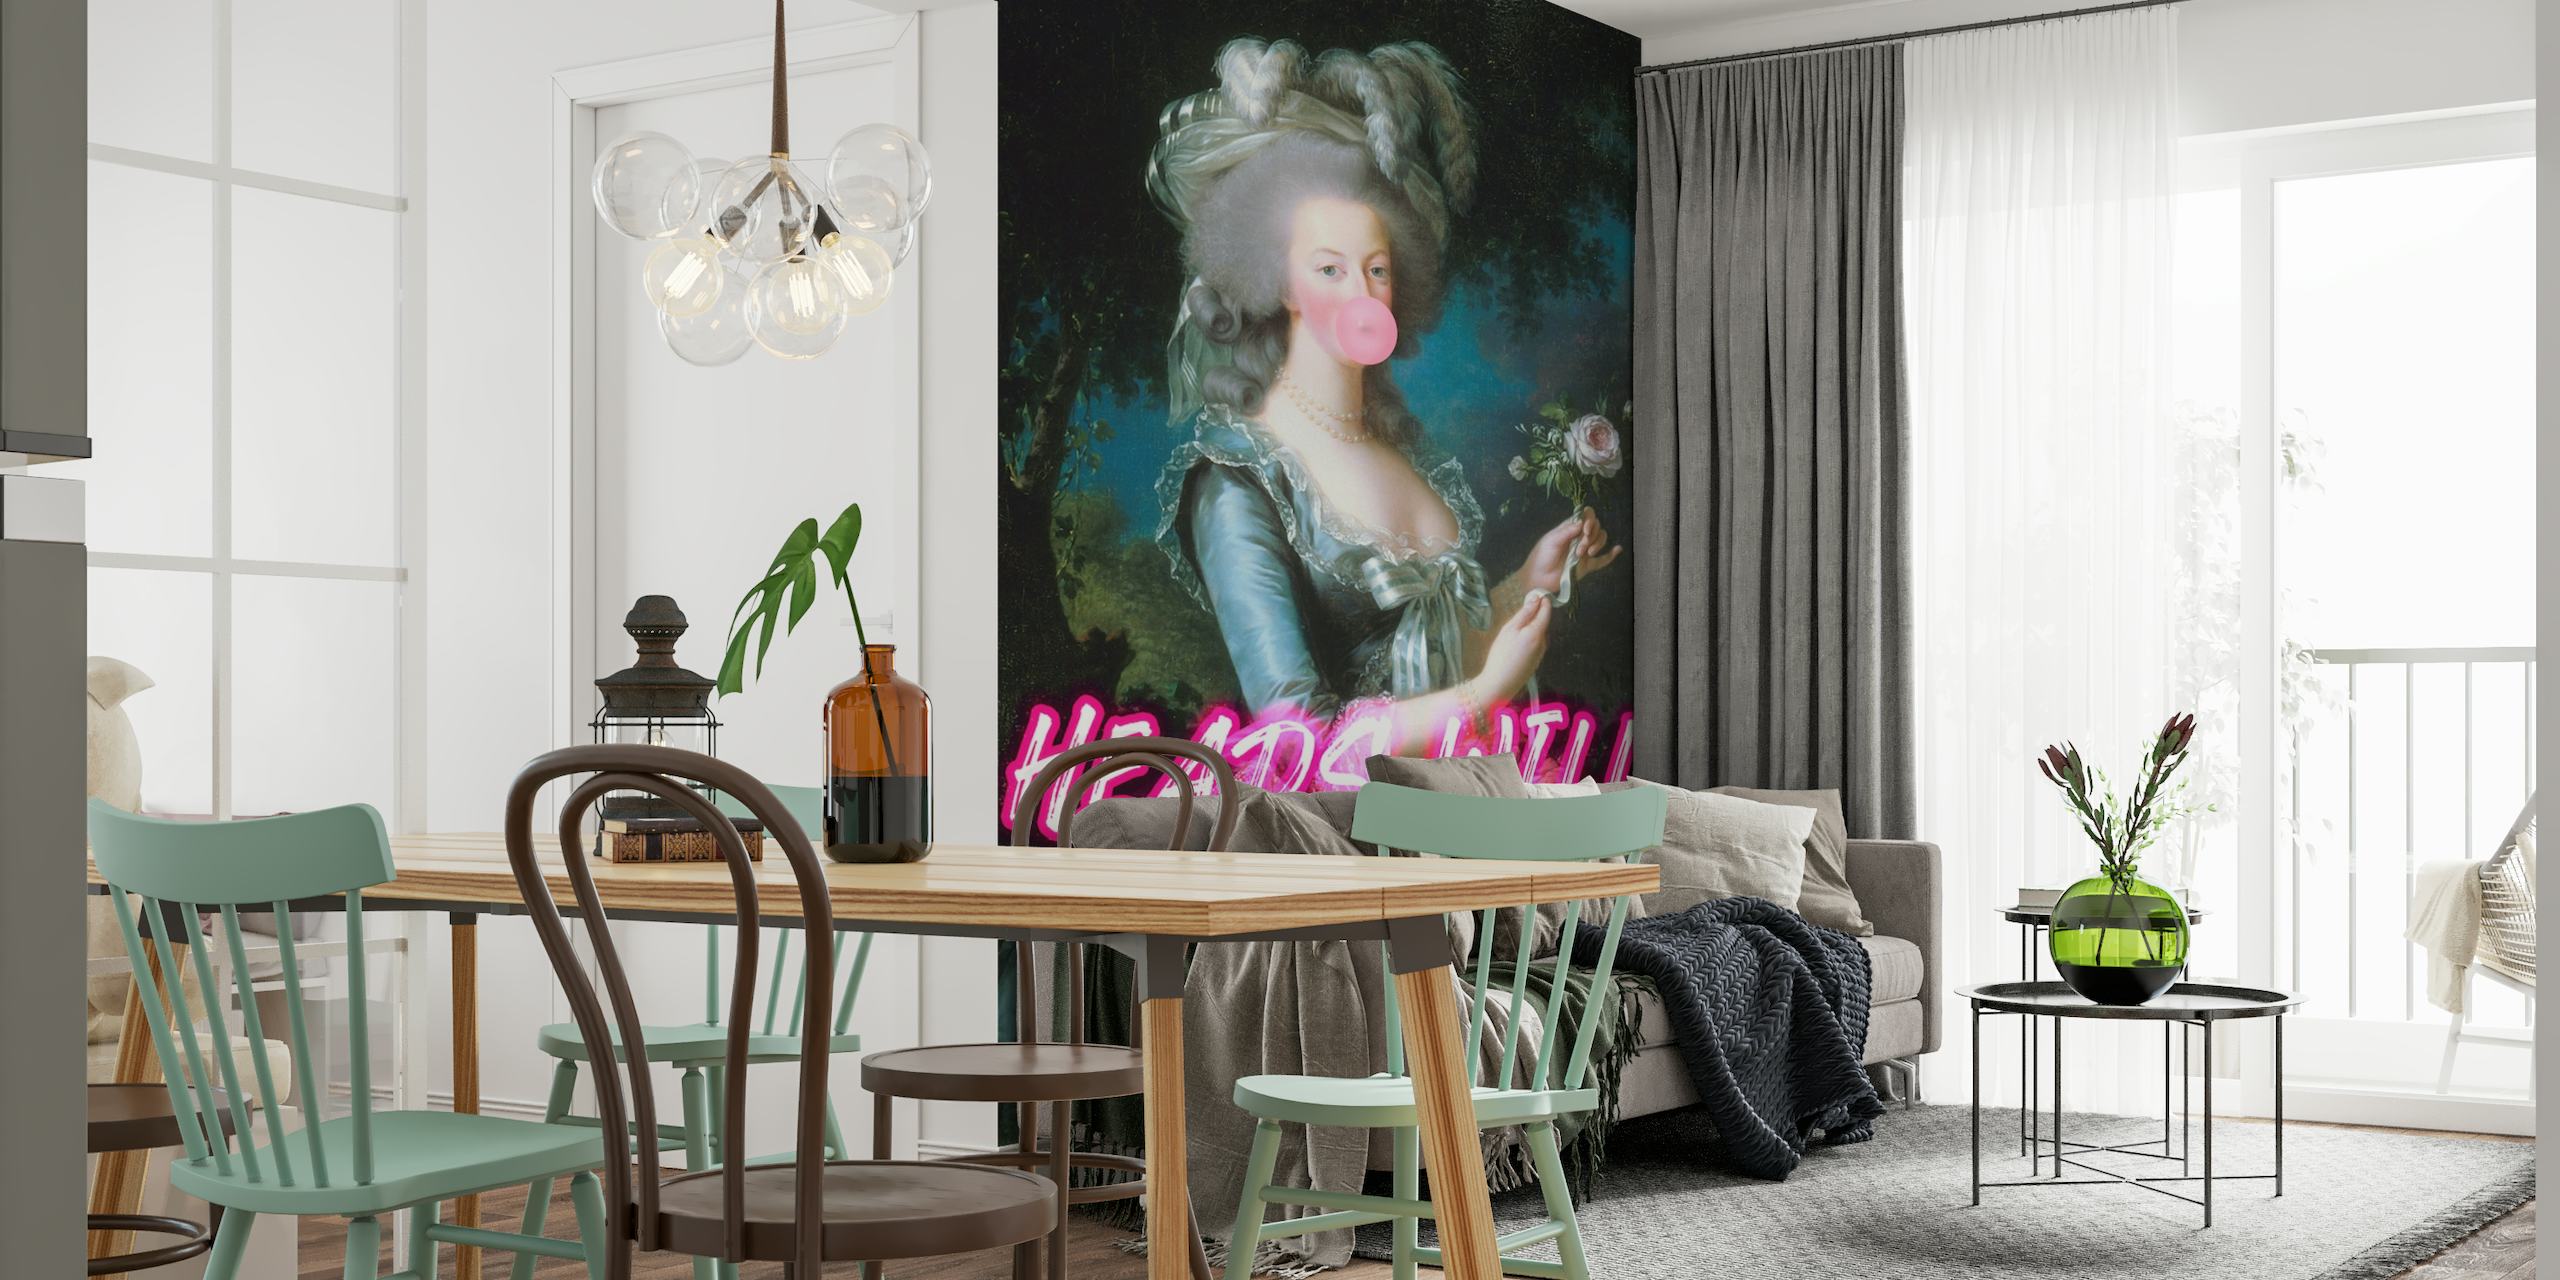 Marie Antoinette figure with neon text and bubble gum wall mural